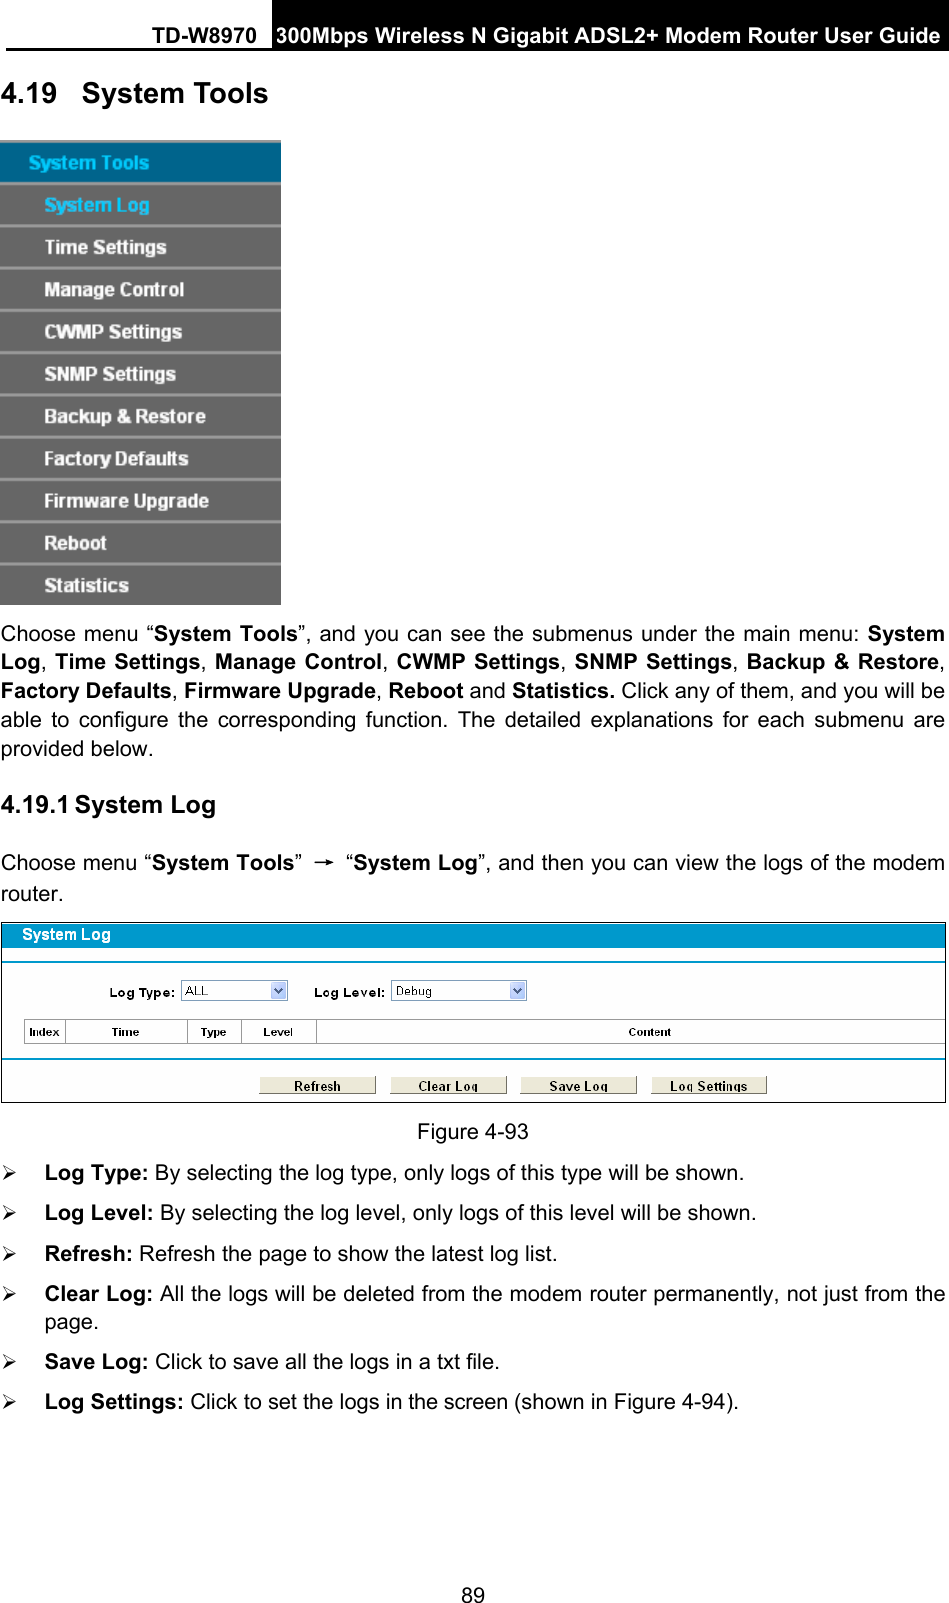 TD-W8970 300Mbps Wireless N Gigabit ADSL2+ Modem Router User Guide 89 4.19  System Tools  Choose menu “System Tools”, and you can see the submenus under the main menu: System Log, Time Settings, Manage Control, CWMP Settings, SNMP Settings, Backup &amp; Restore, Factory Defaults, Firmware Upgrade, Reboot and Statistics. Click any of them, and you will be able to configure the corresponding function. The detailed explanations for each submenu are provided below. 4.19.1 System Log Choose menu “System Tools” → “System Log”, and then you can view the logs of the modem router.  Figure 4-93   ¾ Log Type: By selecting the log type, only logs of this type will be shown. ¾ Log Level: By selecting the log level, only logs of this level will be shown. ¾ Refresh: Refresh the page to show the latest log list. ¾ Clear Log: All the logs will be deleted from the modem router permanently, not just from the page.  ¾ Save Log: Click to save all the logs in a txt file.   ¾ Log Settings: Click to set the logs in the screen (shown in Figure 4-94). 